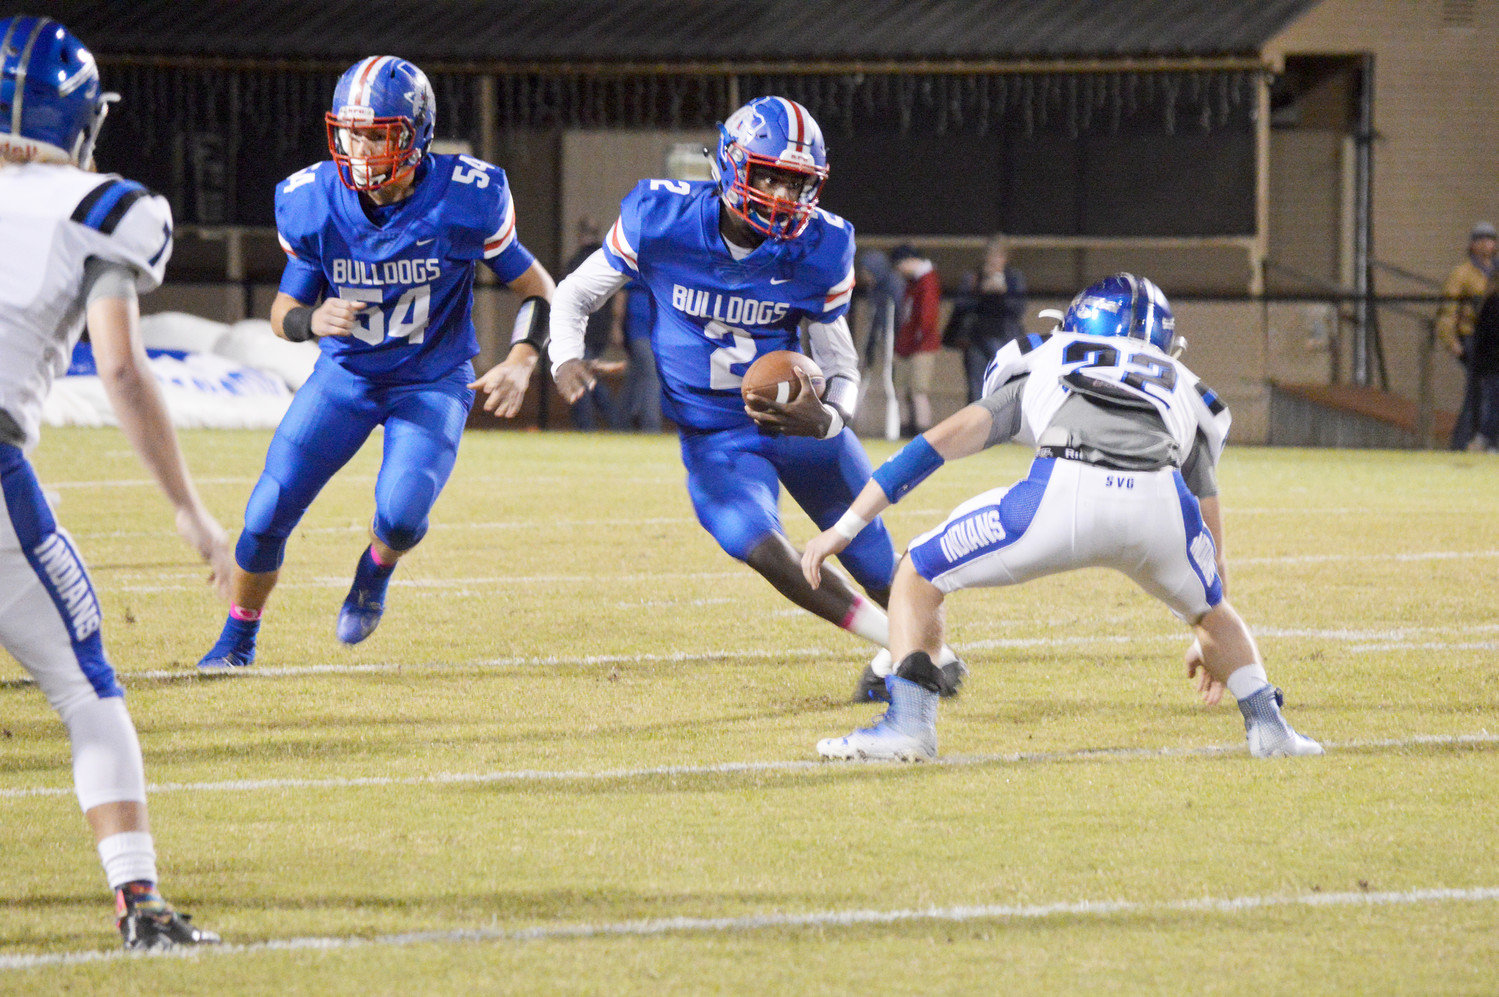 Quitman’s Trey Berry (2) picks up yardage against Frankston last Friday. Berry rushed for 336 yards in the Bulldogs loss to the Indians. (Monitor photo by Larry Tucker)